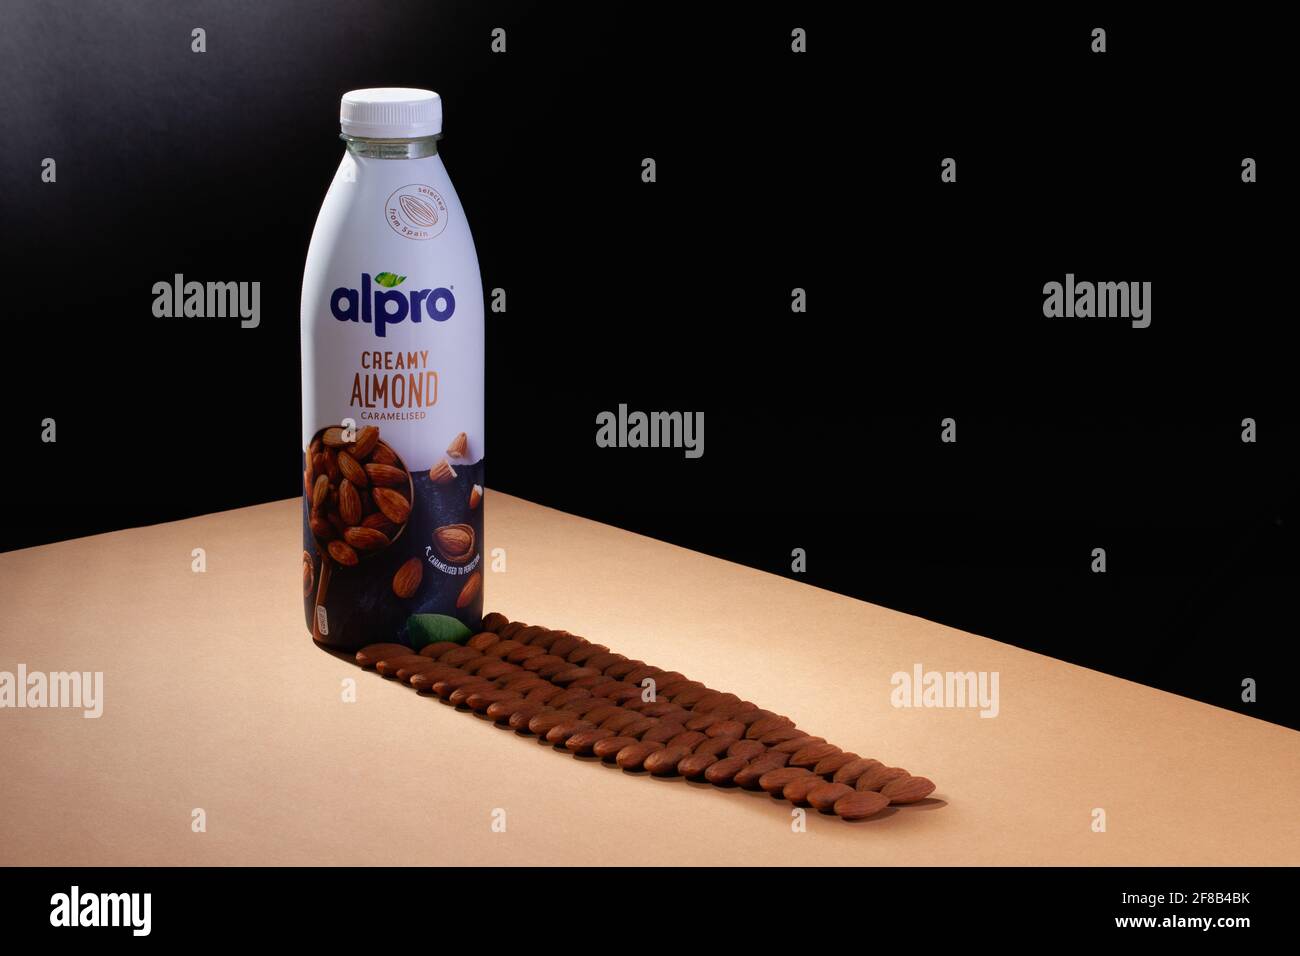 Prague,Czech Republic - 22 March,2021: Alpro almond drink and shadow of  almonds on the brown table. Alpro is a European company that markets  organic Stock Photo - Alamy